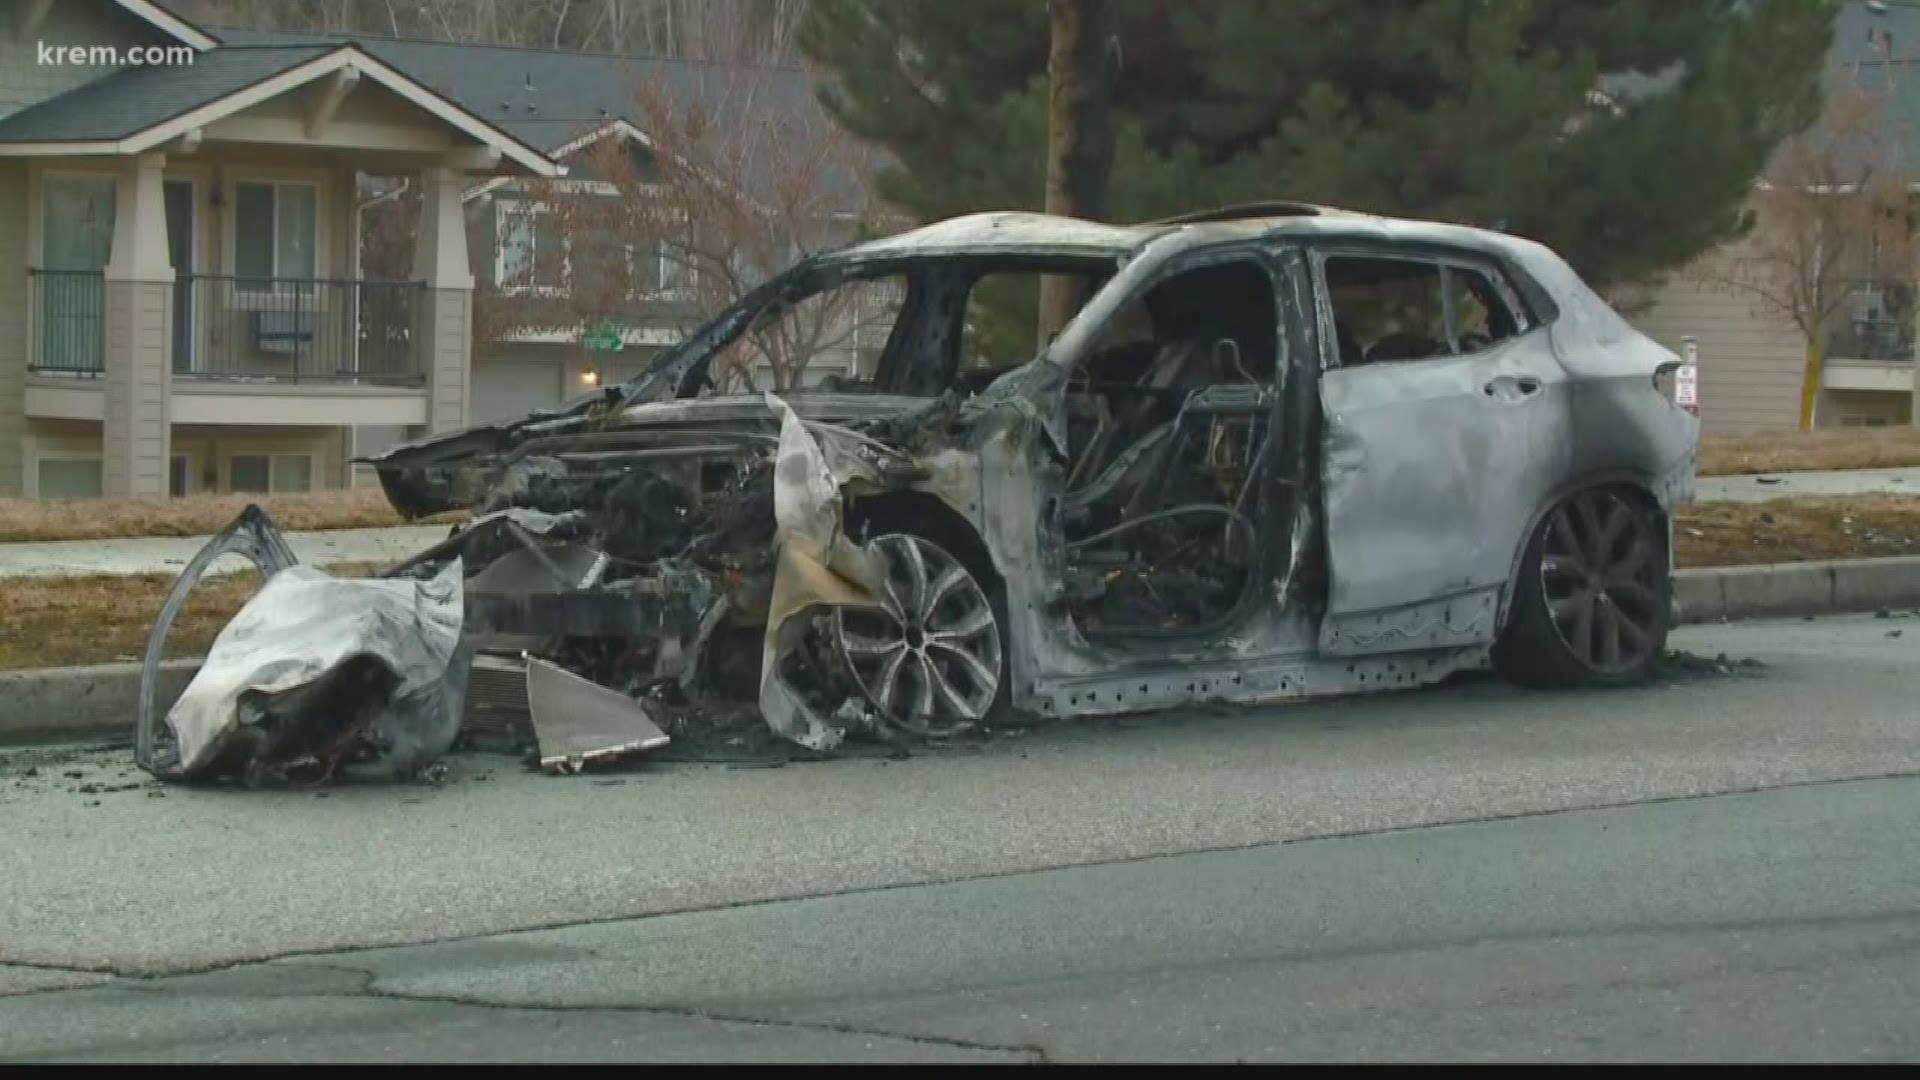 Two unoccupied cars were burned in North Spokane early Wednesday morning. Investigators are looking at the scene for signs of arson.